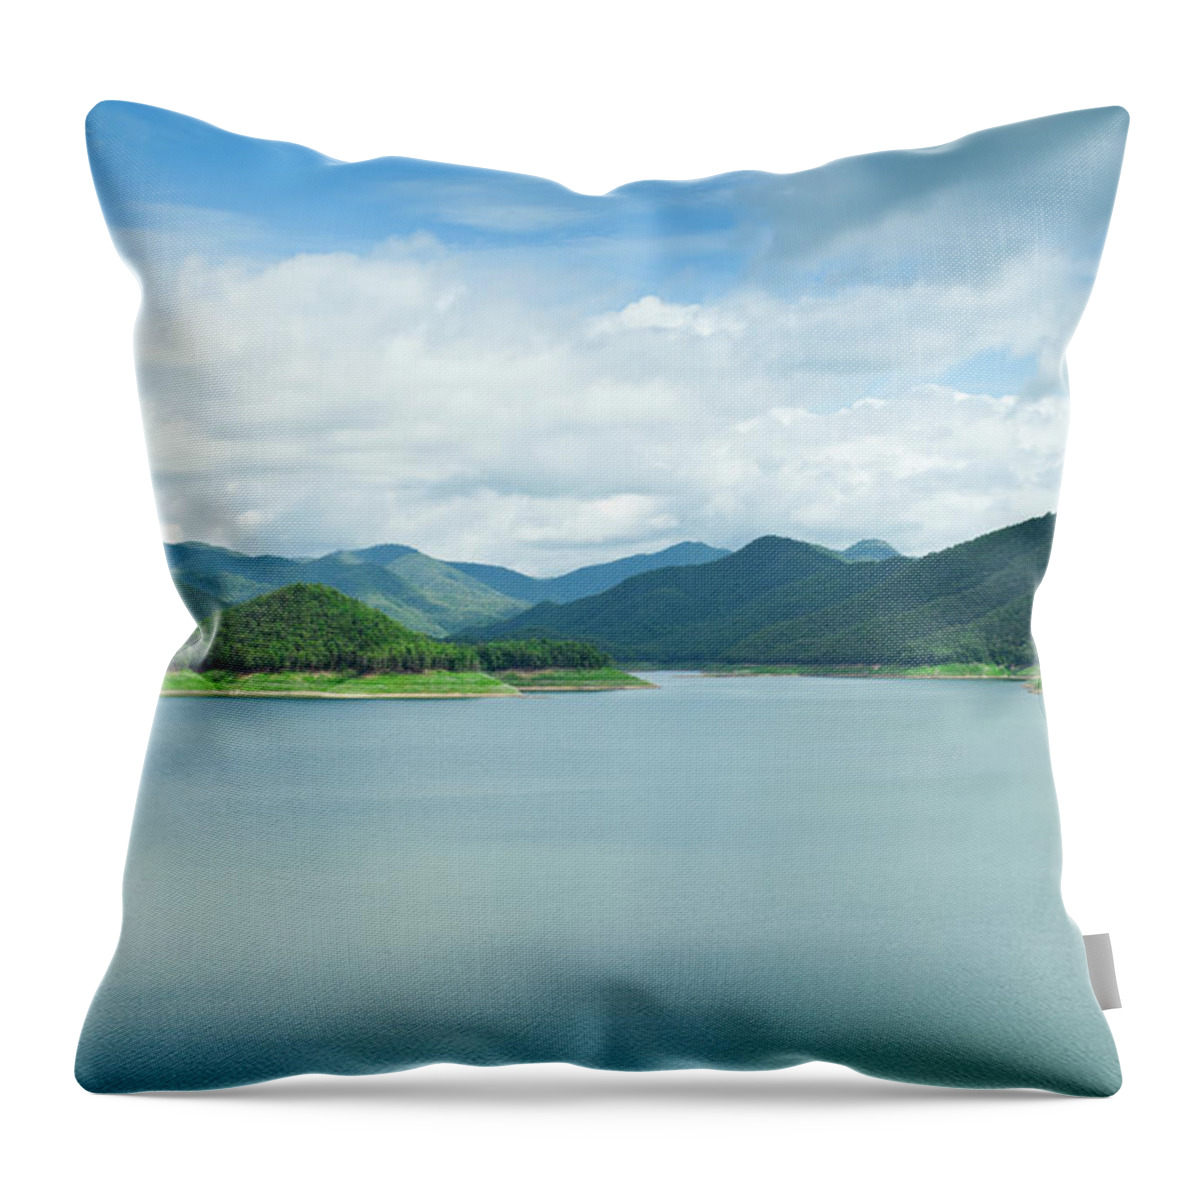 Scenics Throw Pillow featuring the photograph Mae Kuang Dam, Chiang Mai Northern by Edenexposed